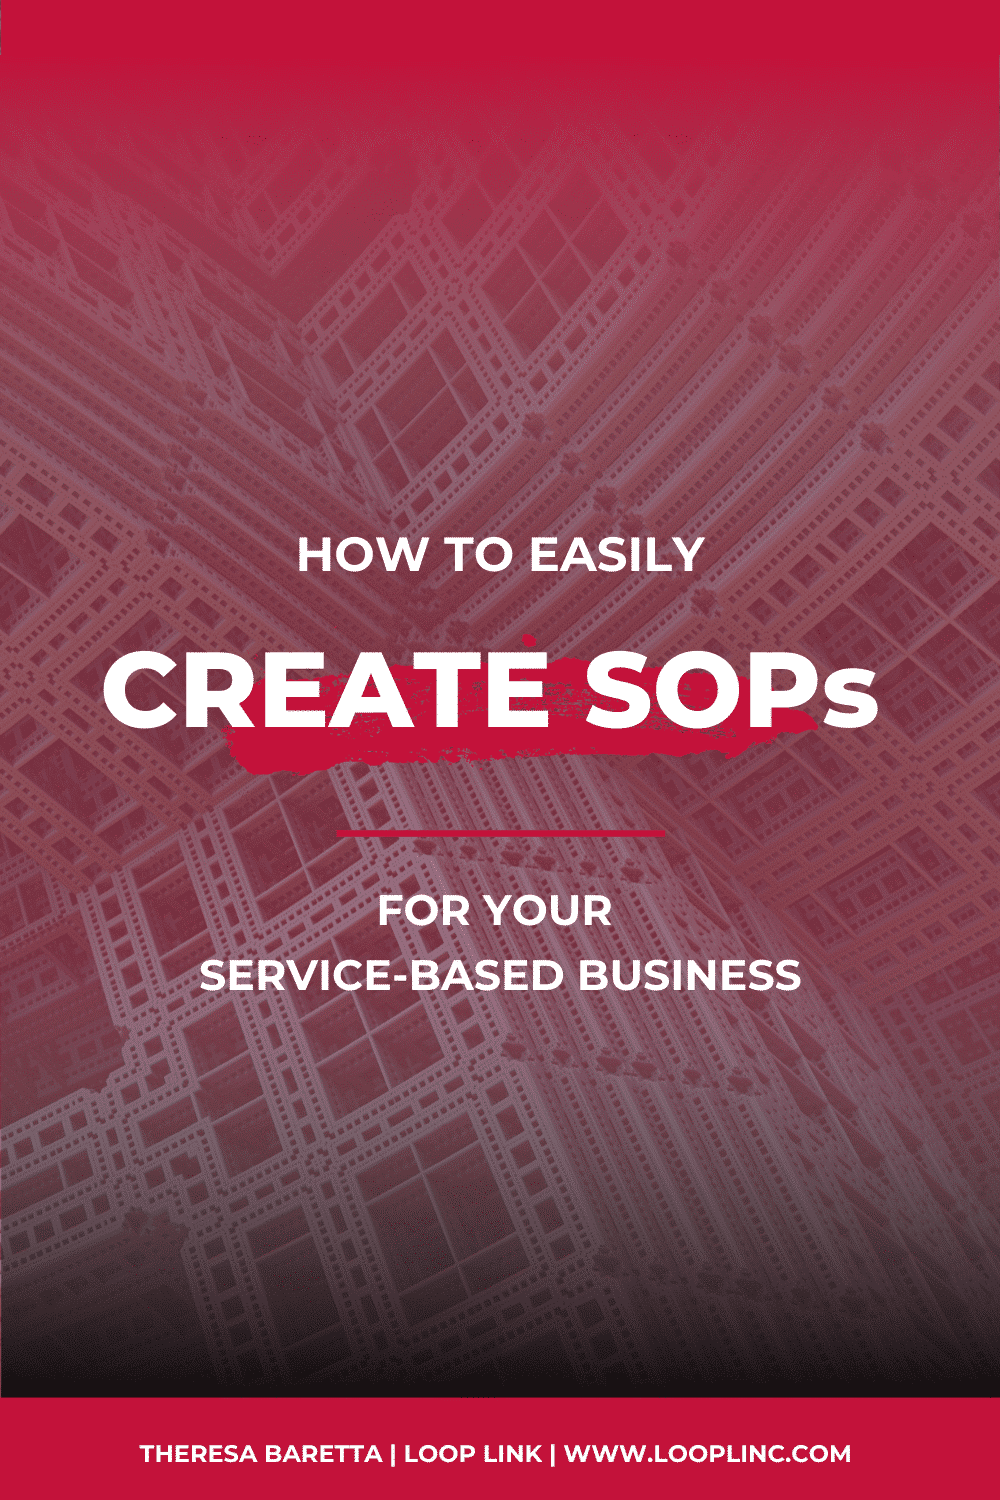 How to Easily Create SOPs for your service-based business